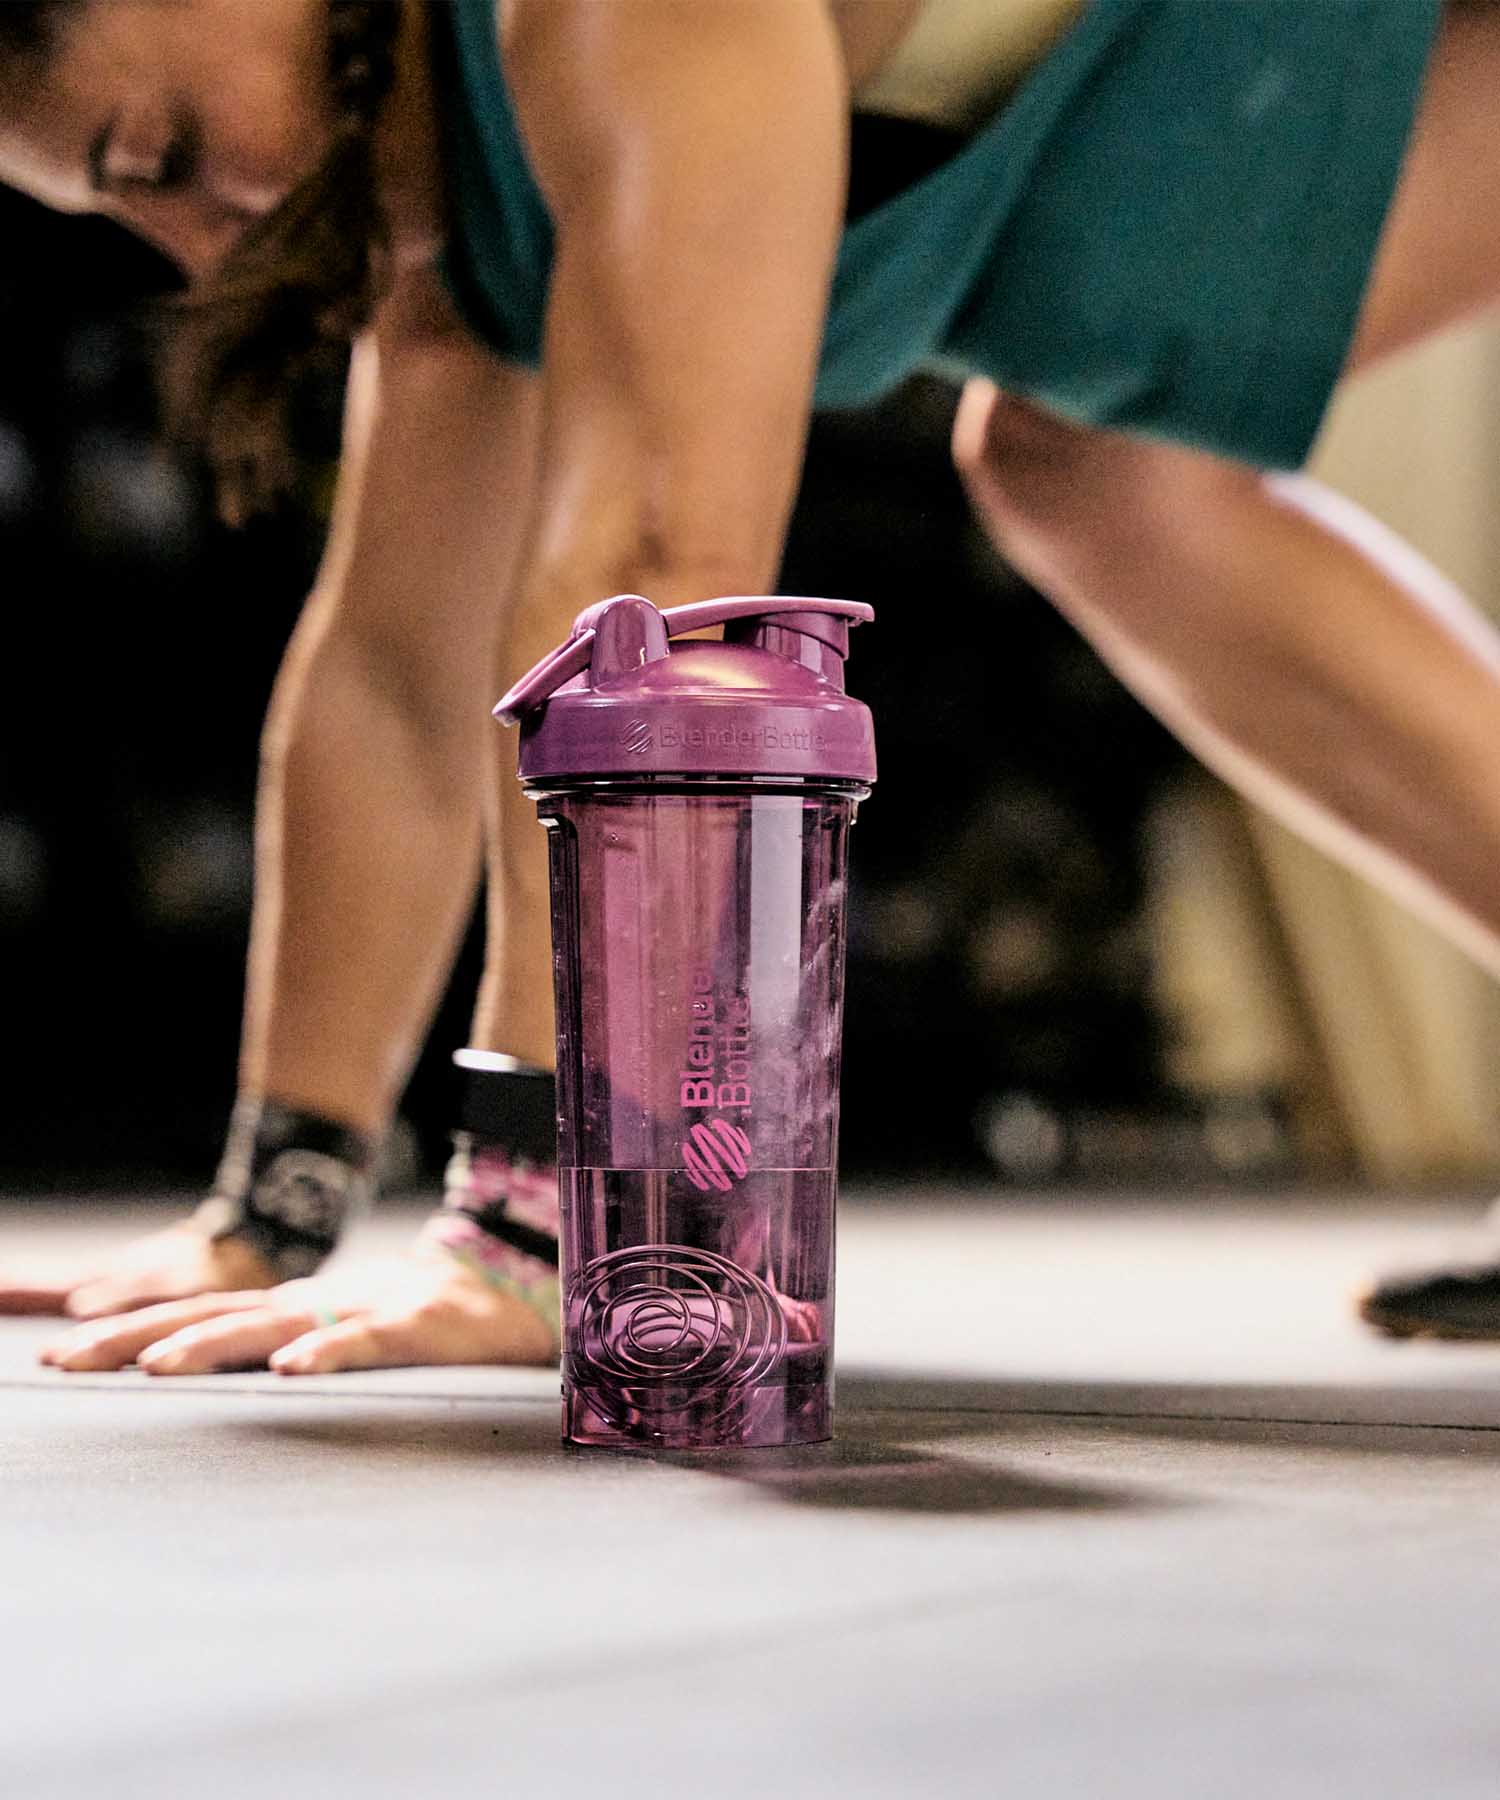 A Pro Series premium shaker bottle on the ground while a woman works out in the background